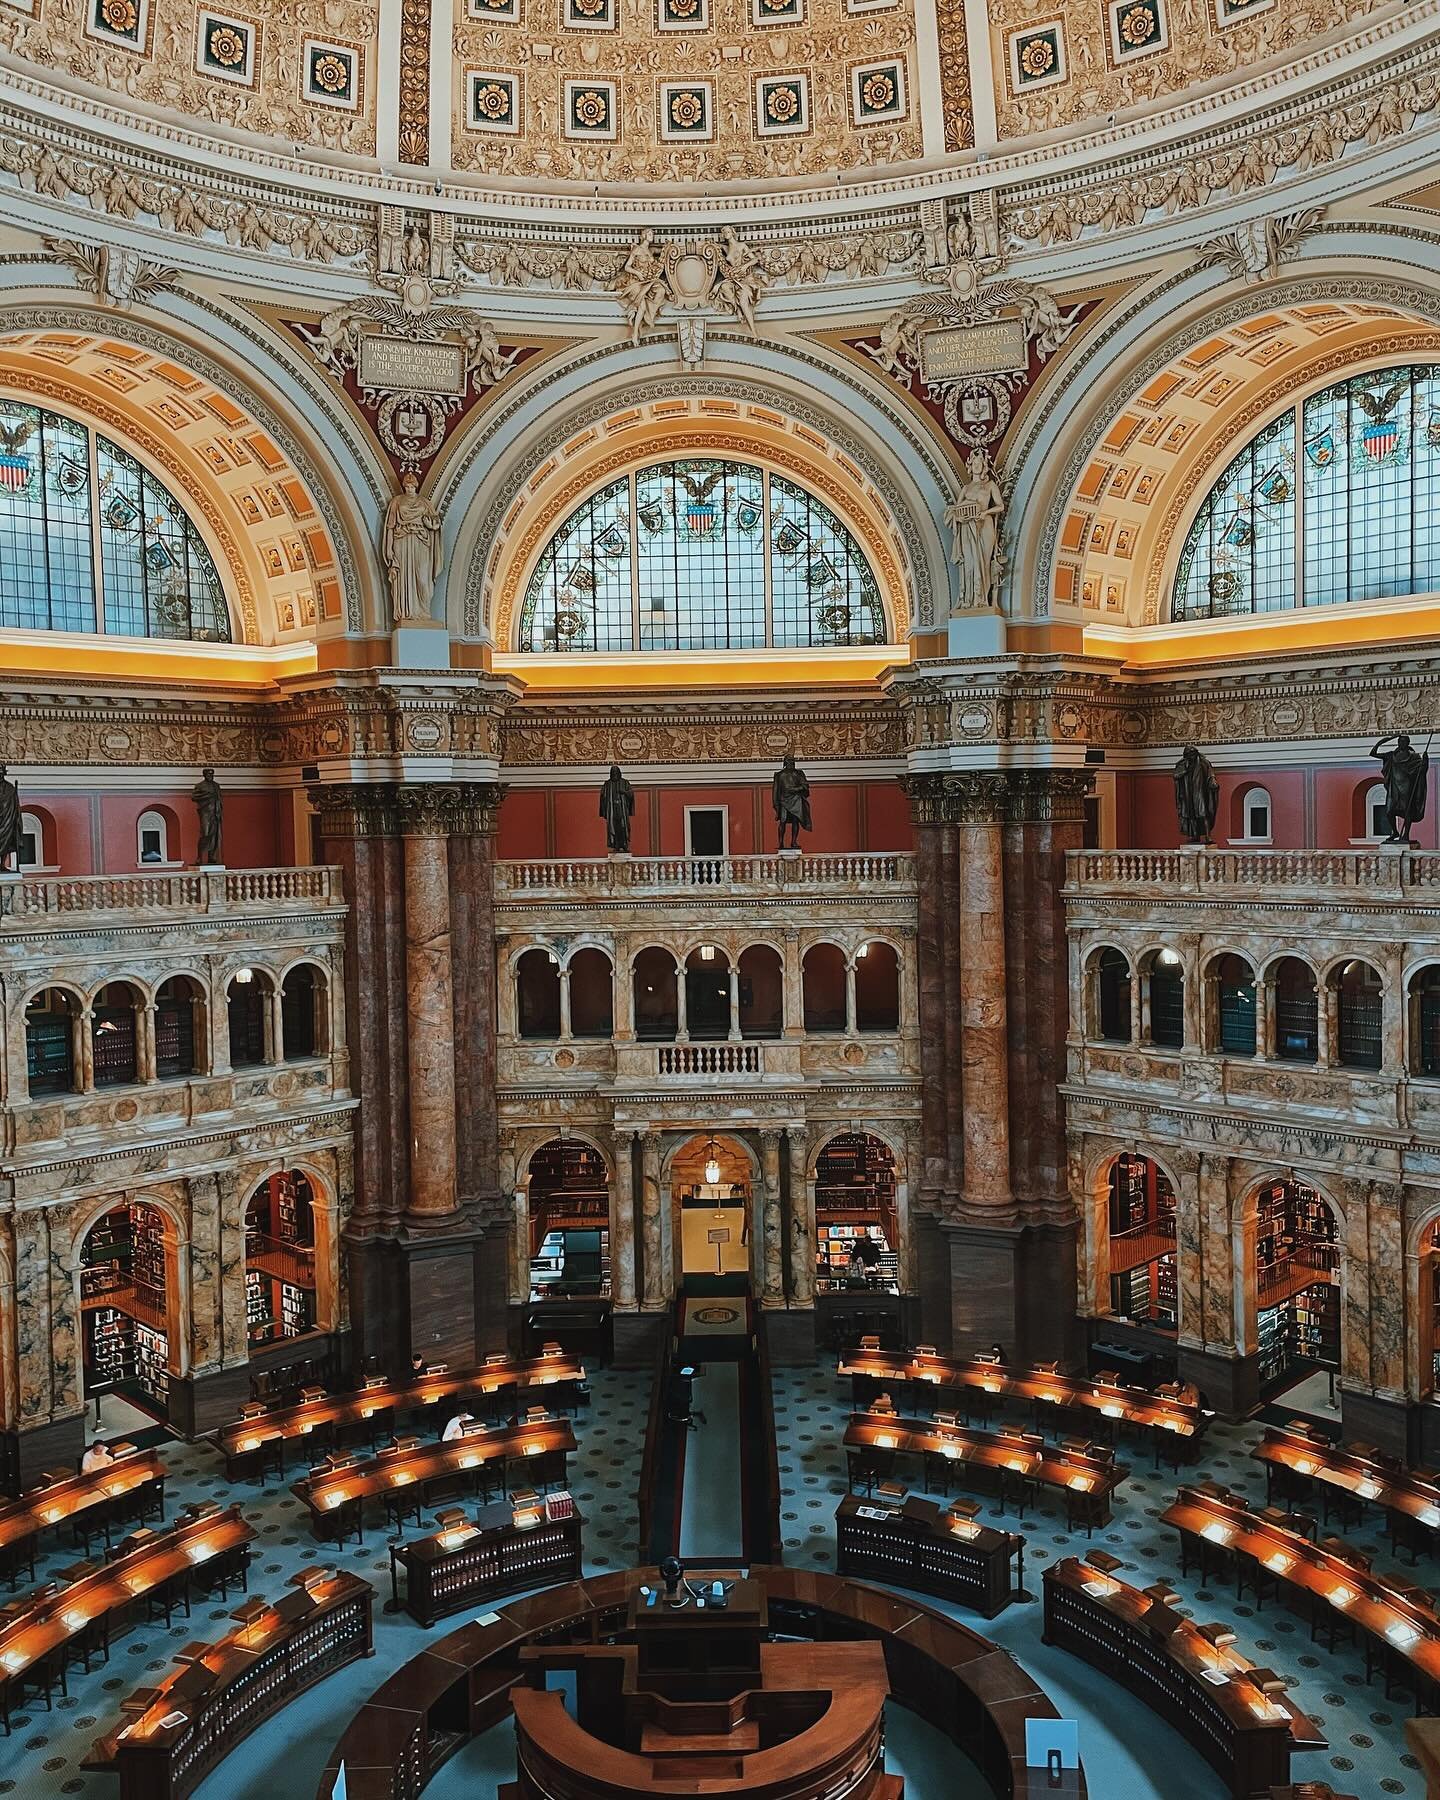 Library of Congress, US Botanical Gardens, and National Portrait Gallery ✨
📚, 🪴, and 🖼️ : my three favorite things! Great day ☺️